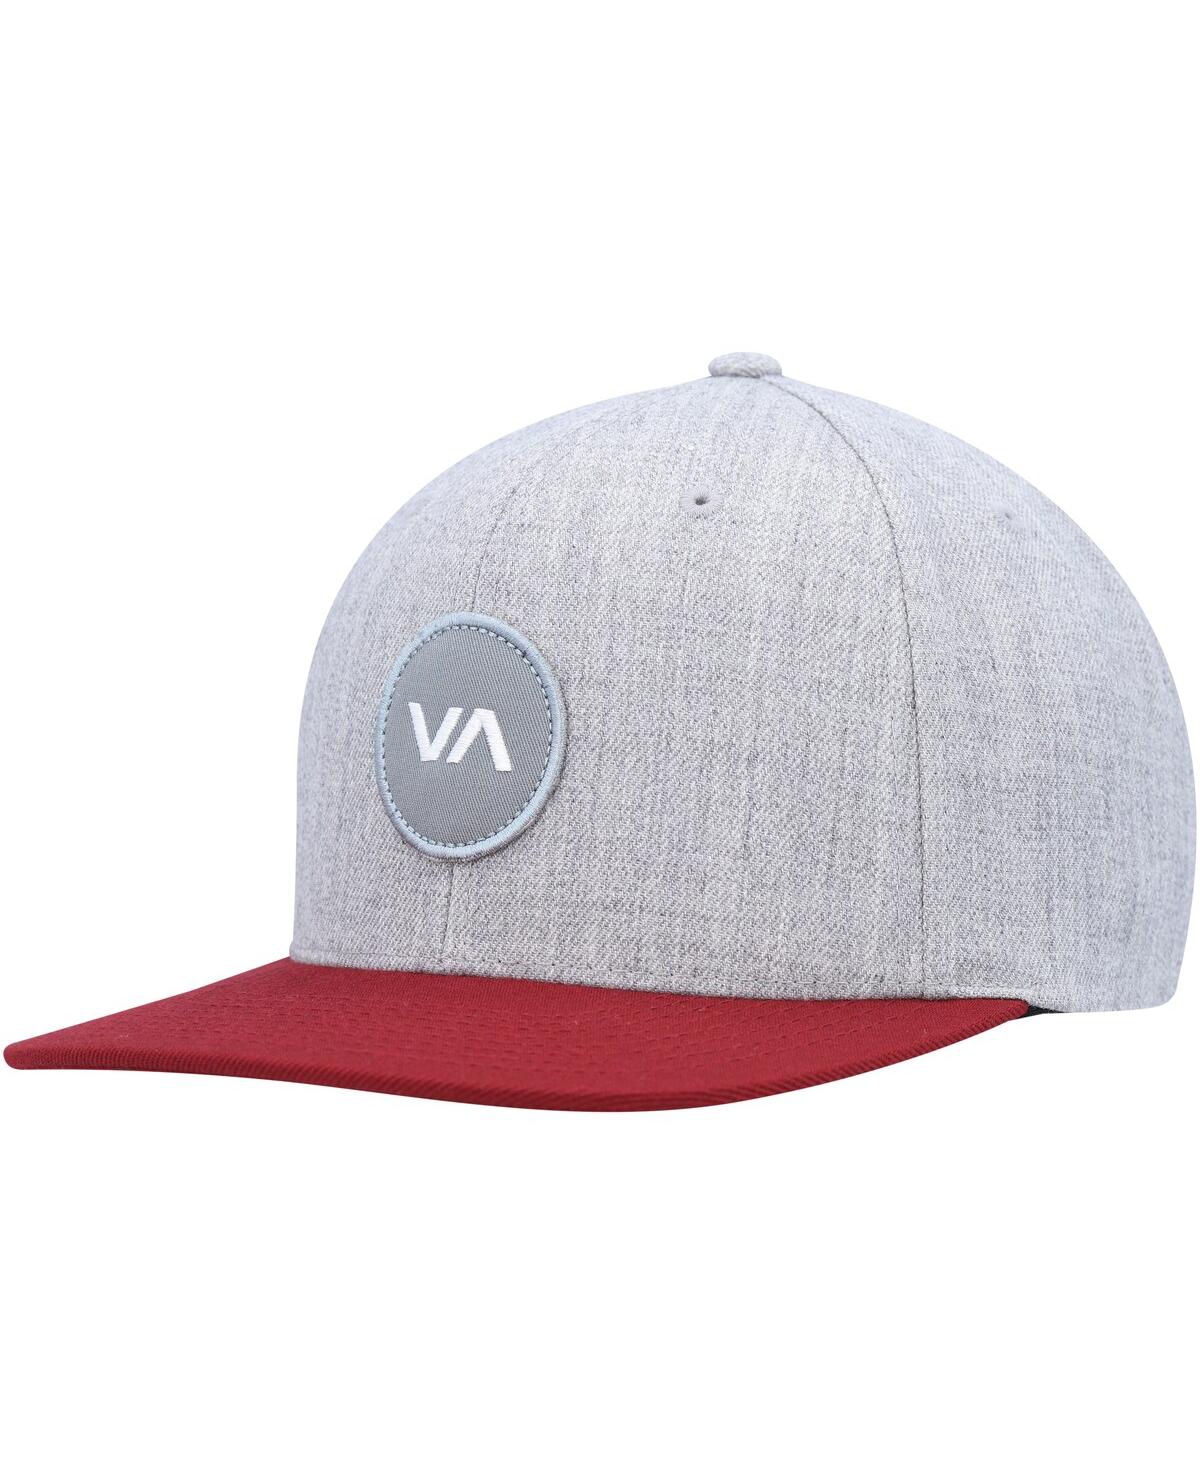 Rvca Men's  Heather Gray, Red Patch Adjustable Snapback Hat In Heather Gray,red